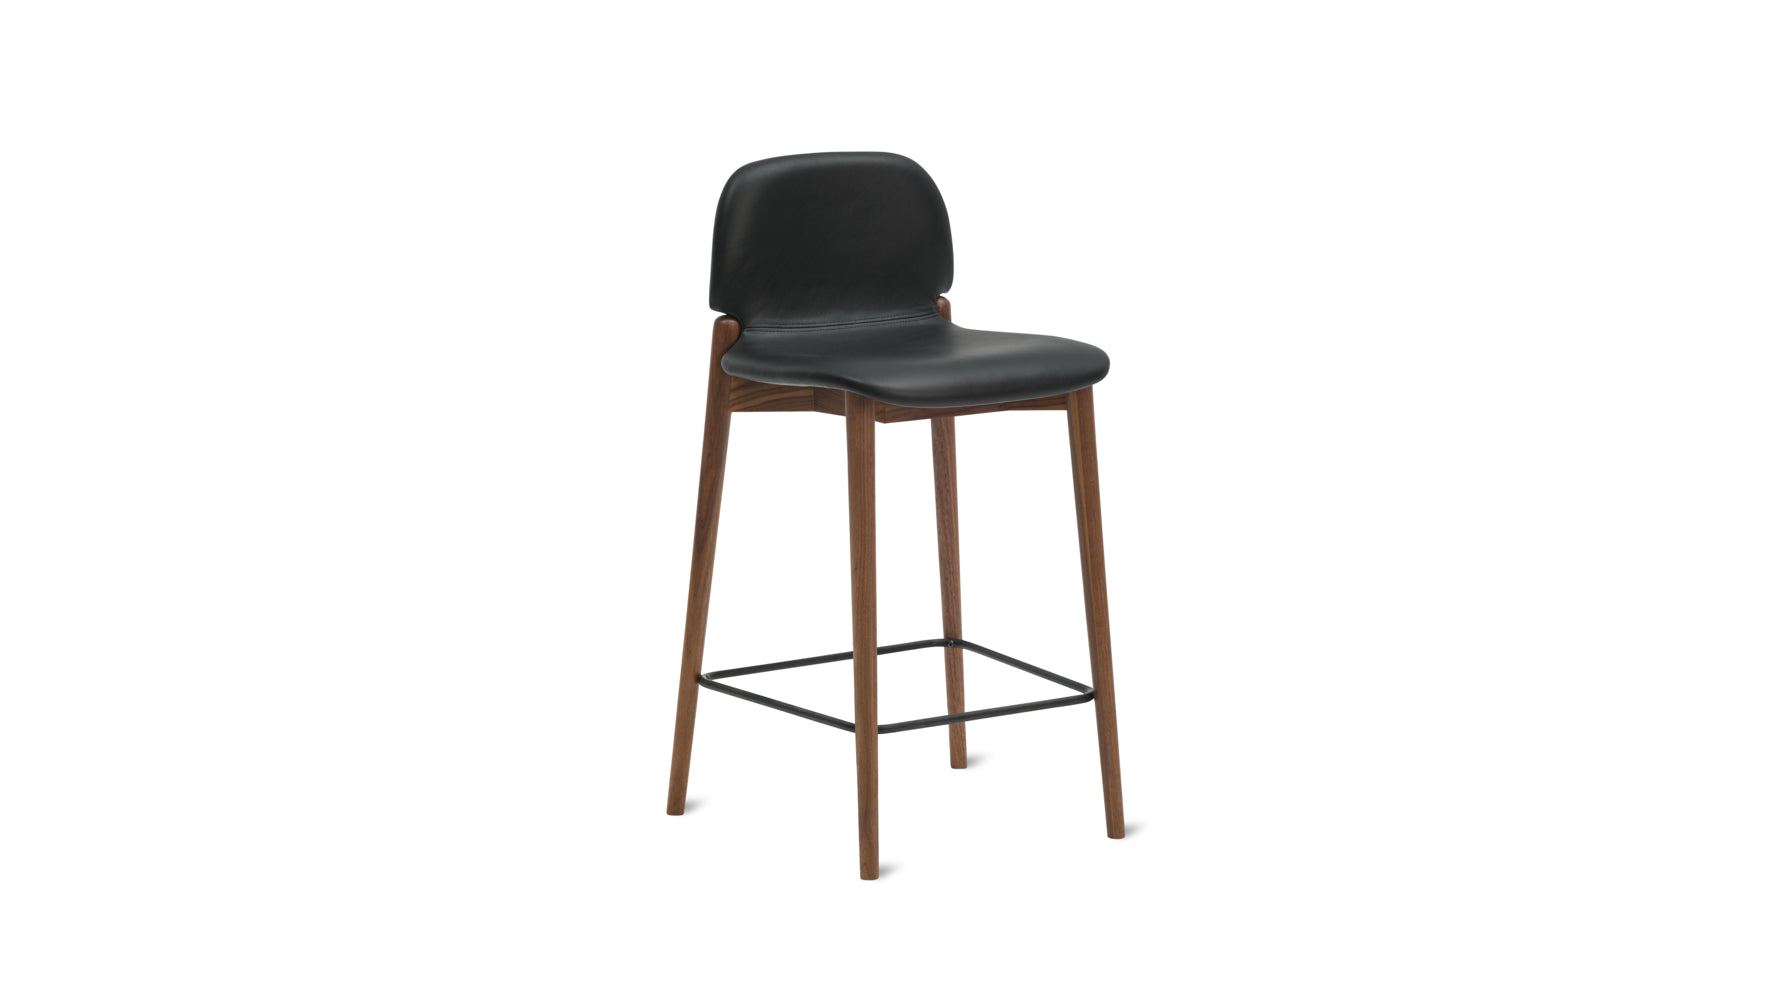 Dine In Stool, Counter, Walnut/Black Leather - Image 2